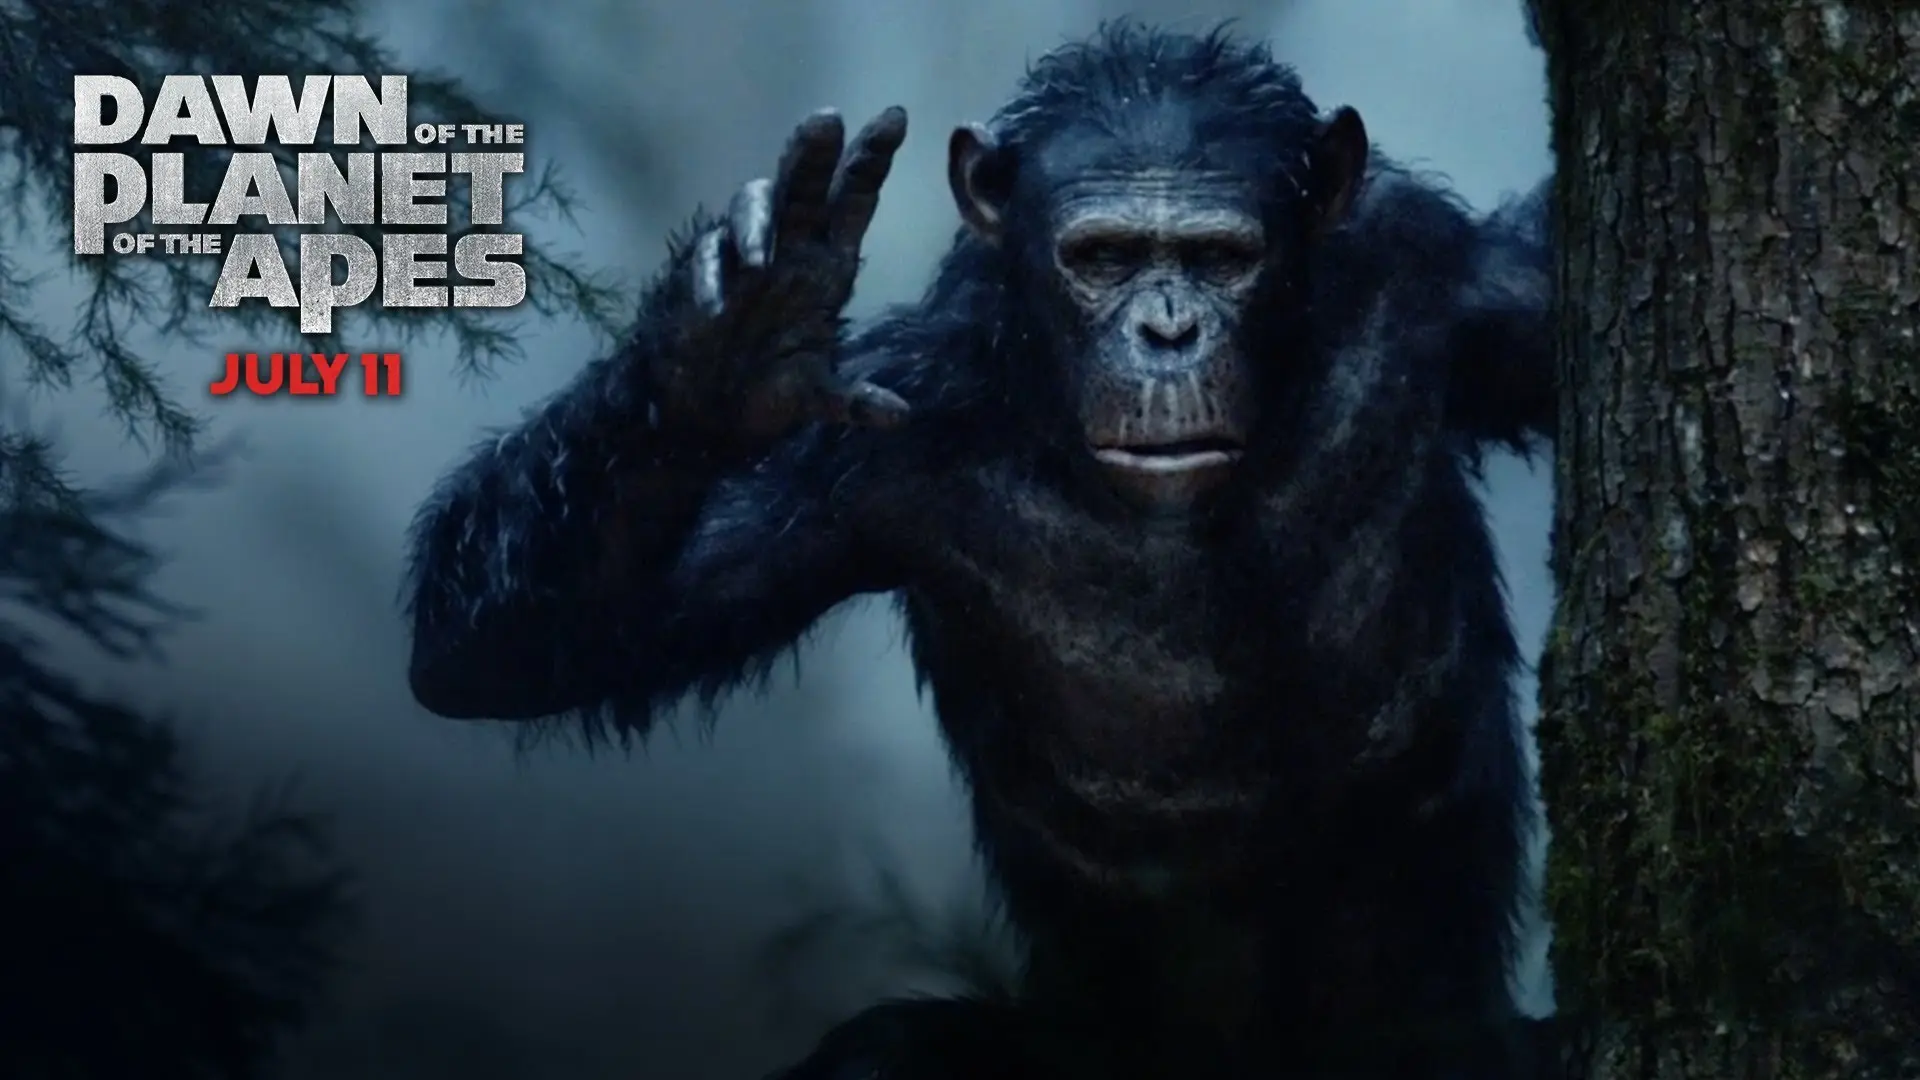 Wallpaper hd: Dawn of the Planet of the Apes - download free in 4K,  wallpaper Movie